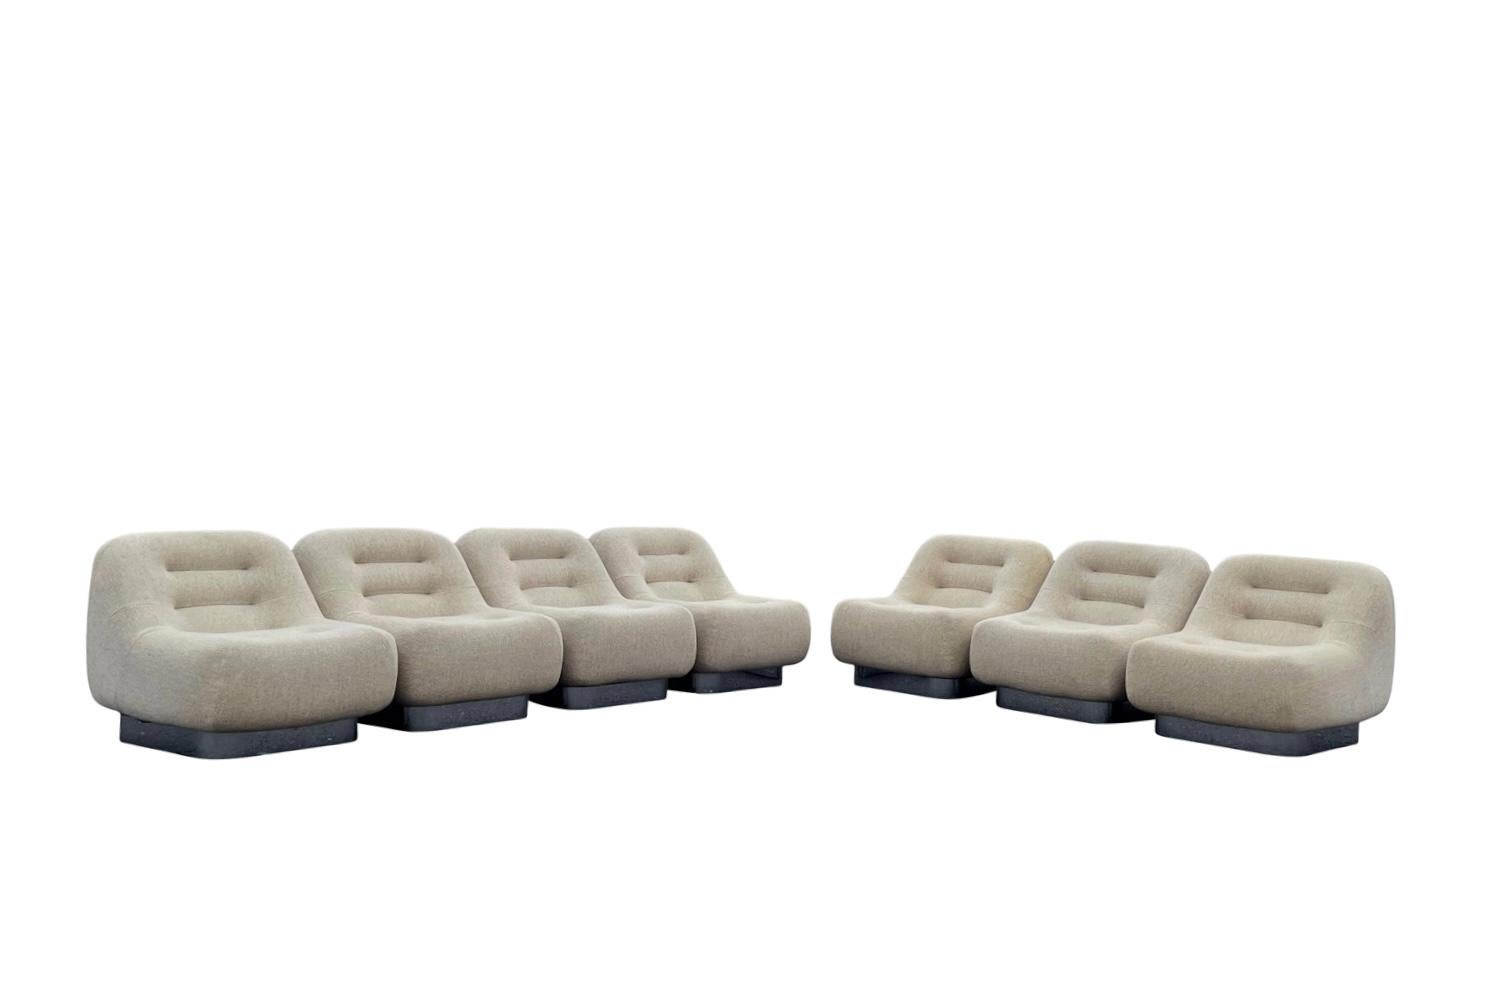 Late 20th Century Space-Age M. F. Harty for Stow Davis Tomorrow Sofa Chair Set of 7 For Sale